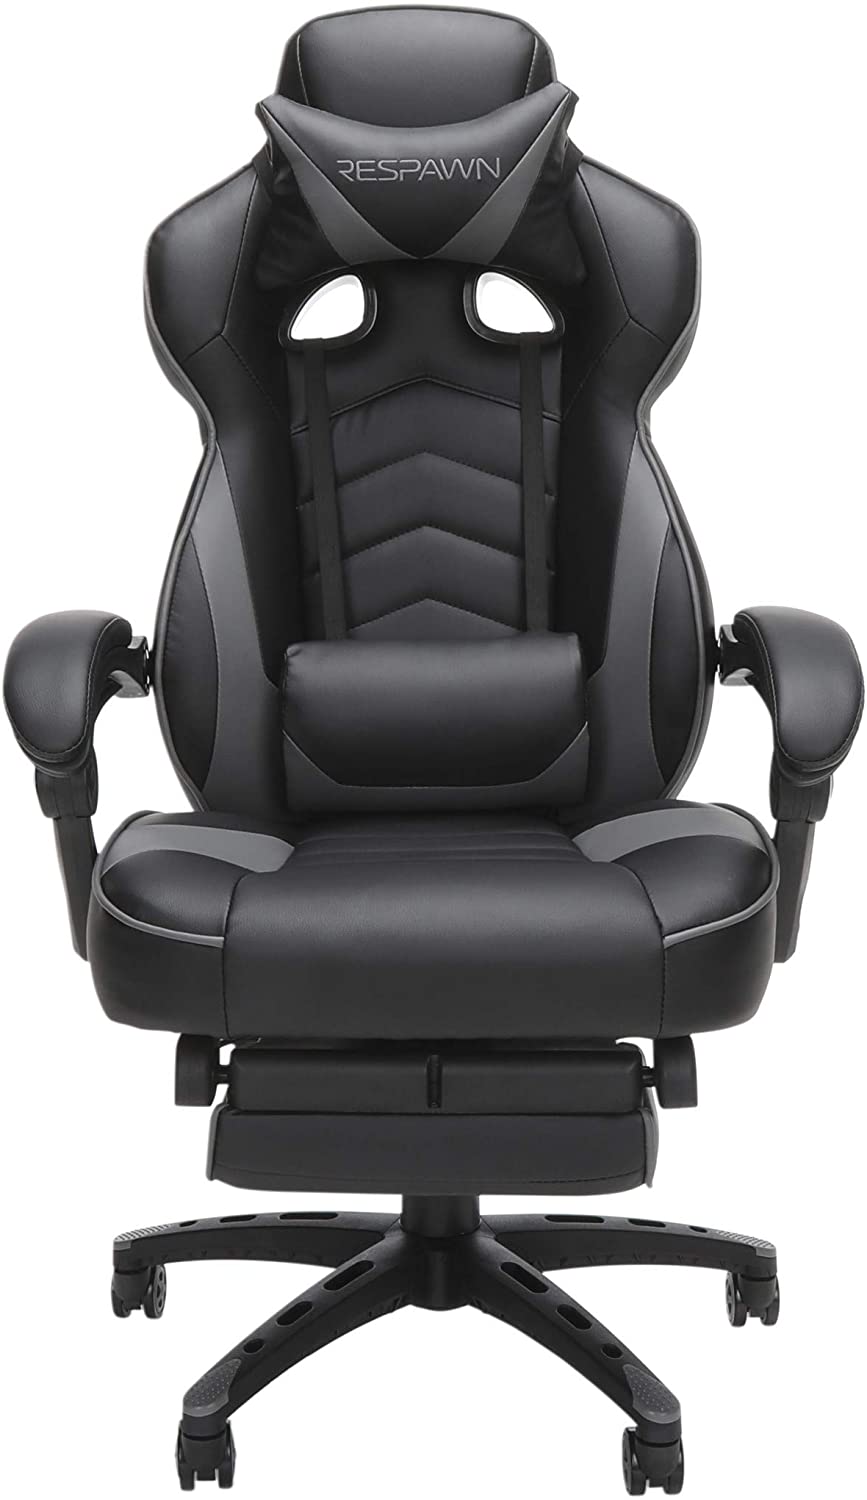 Respawn gaming chair Dr227